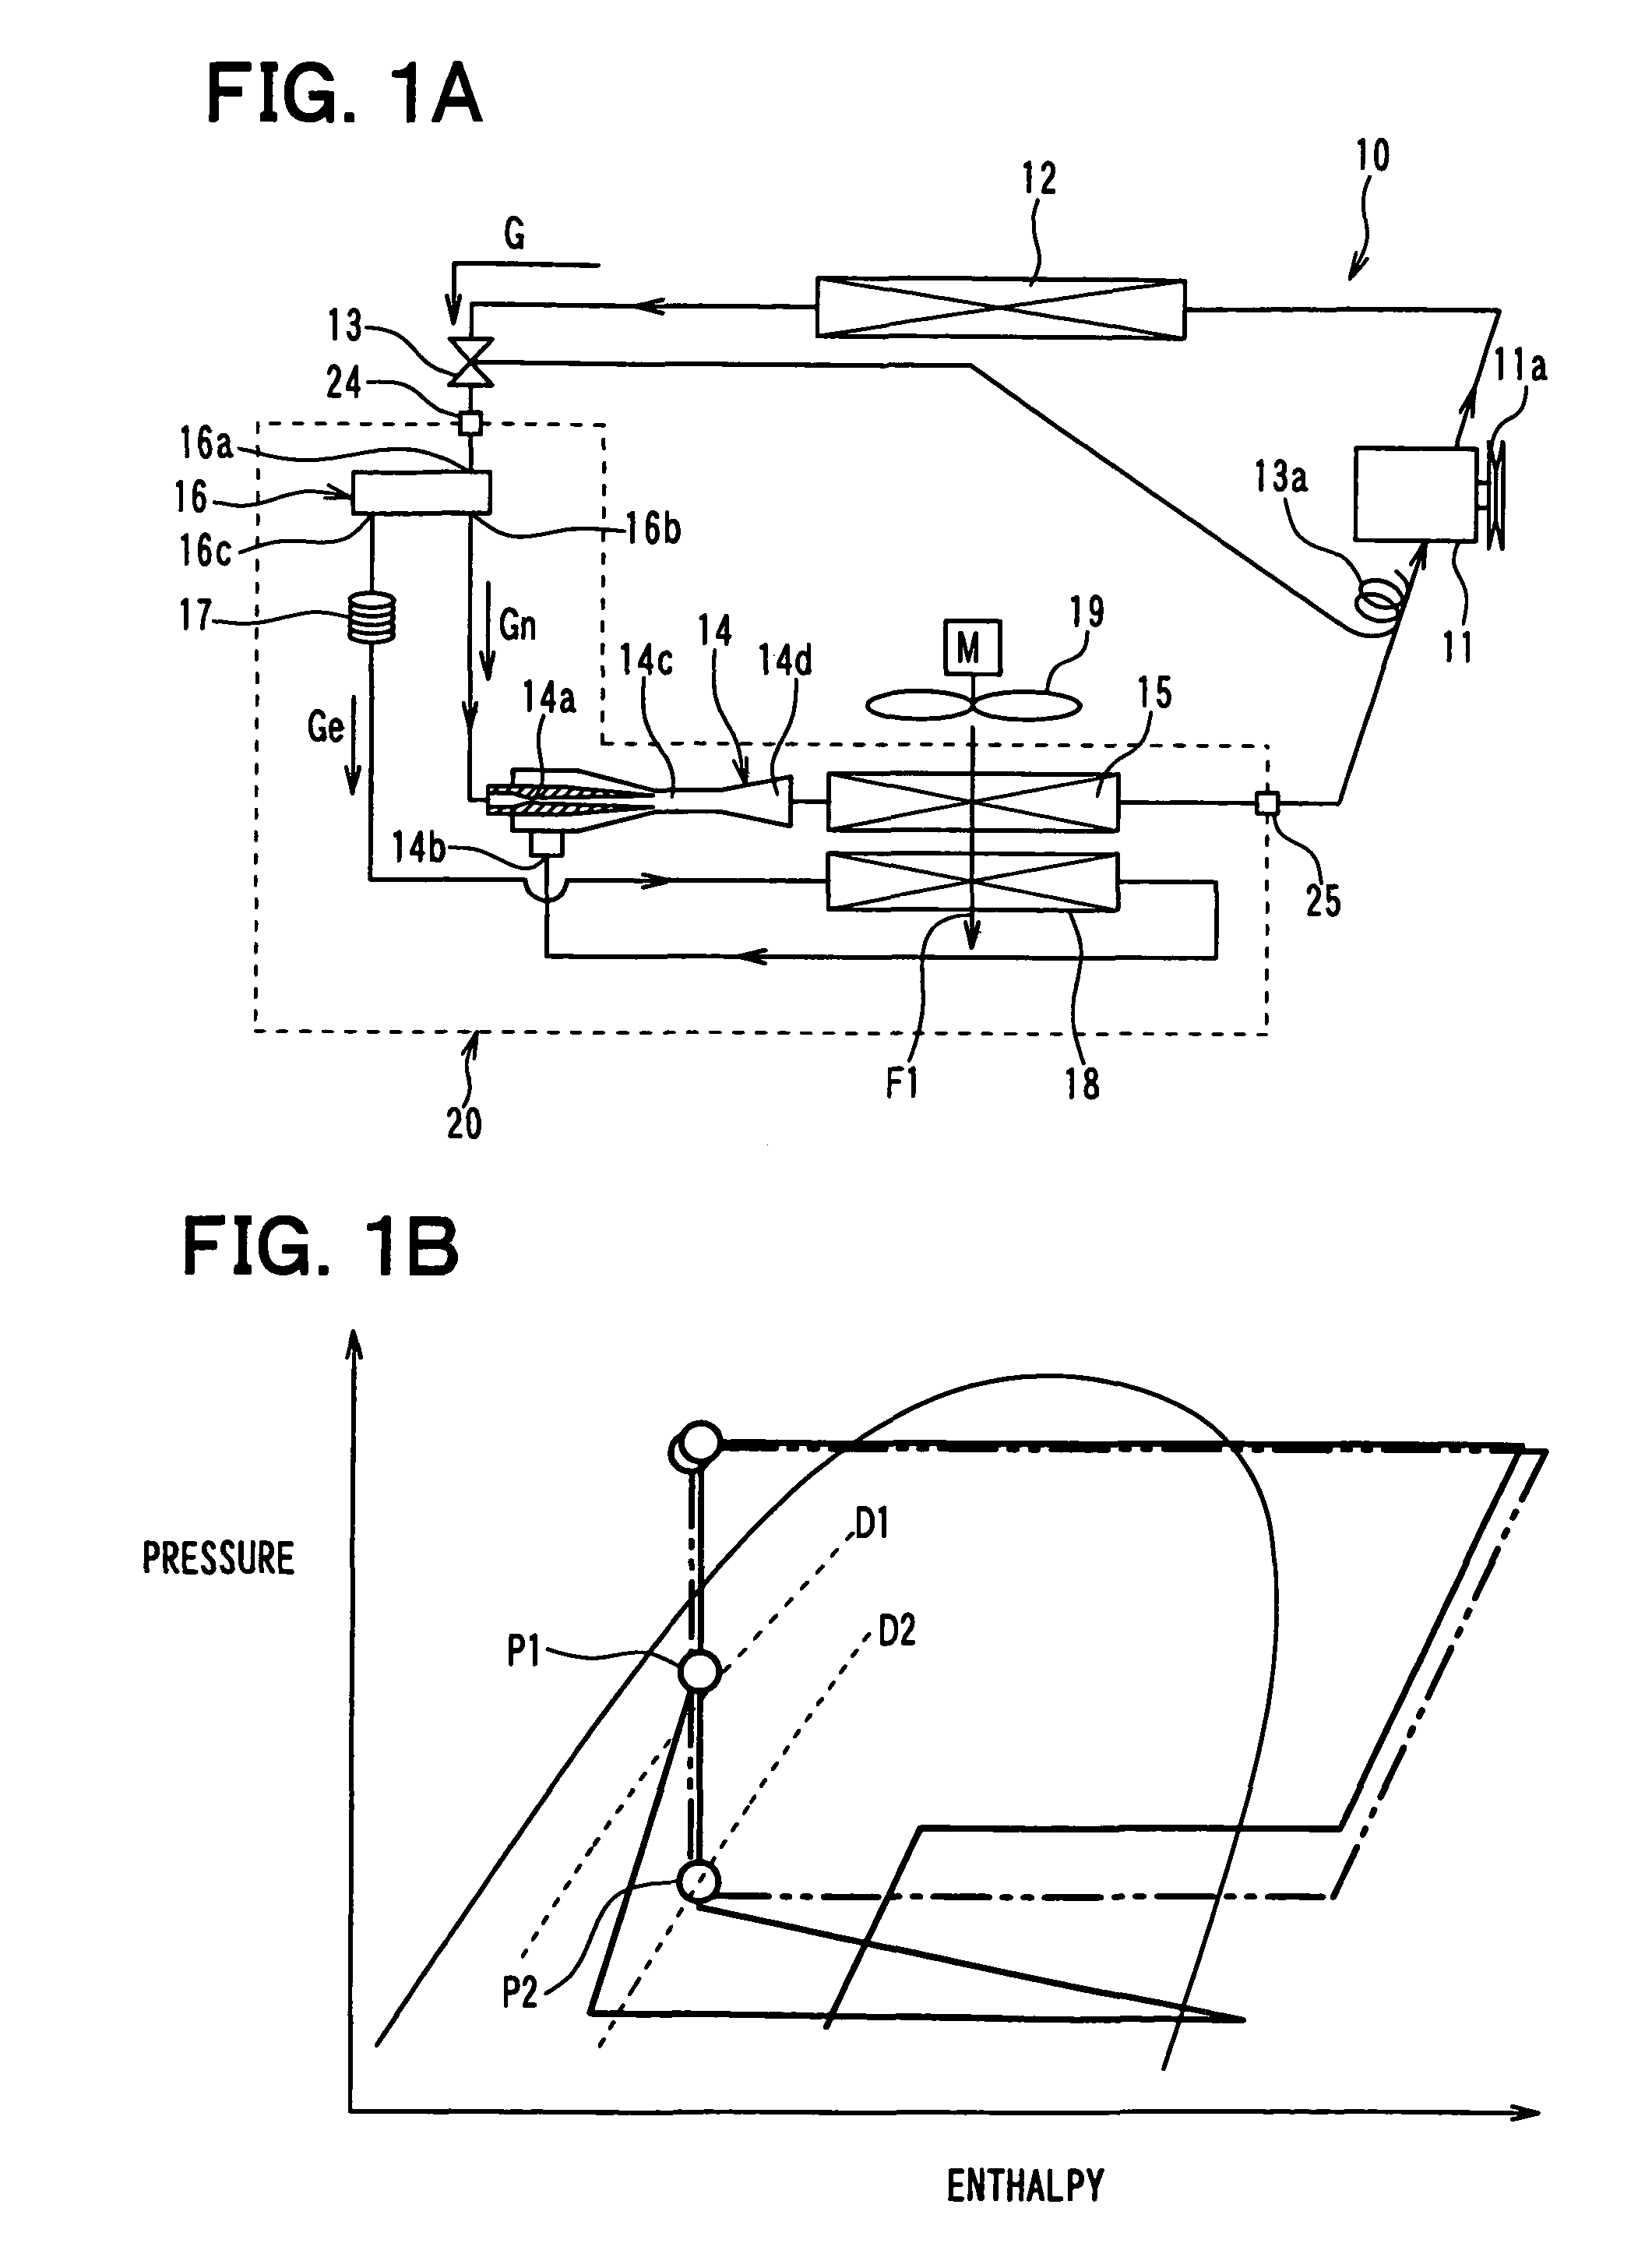 Dual evaporator unit with integrated ejector having refrigerant flow adjustability